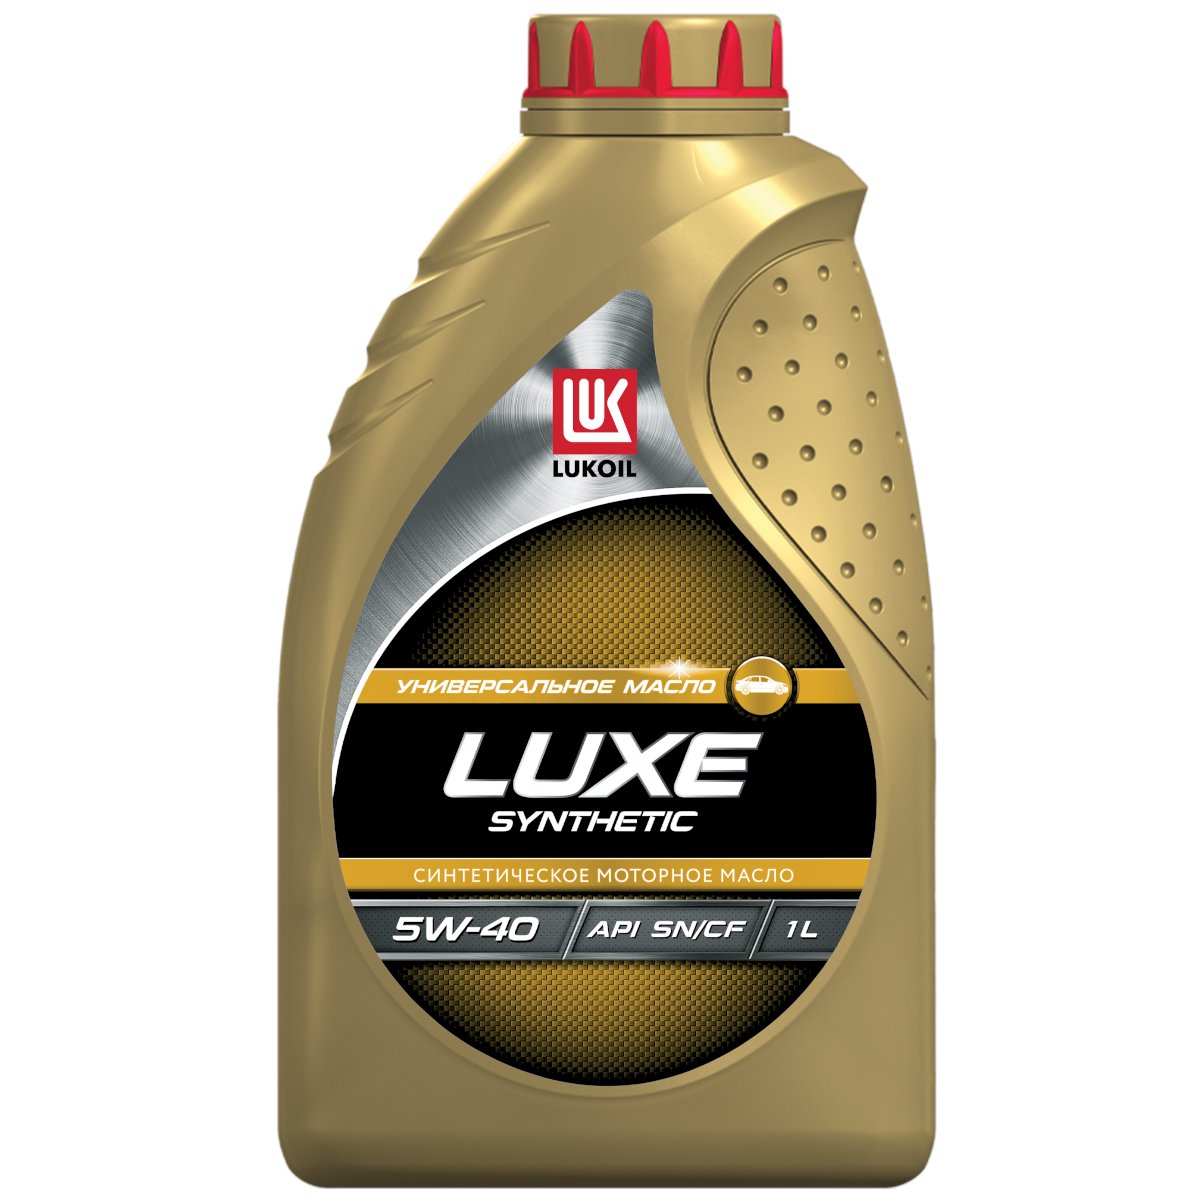 Масло моторное LUKOIL LUXE SYNTHETIC 5W-40, API SN/CF, 1 л